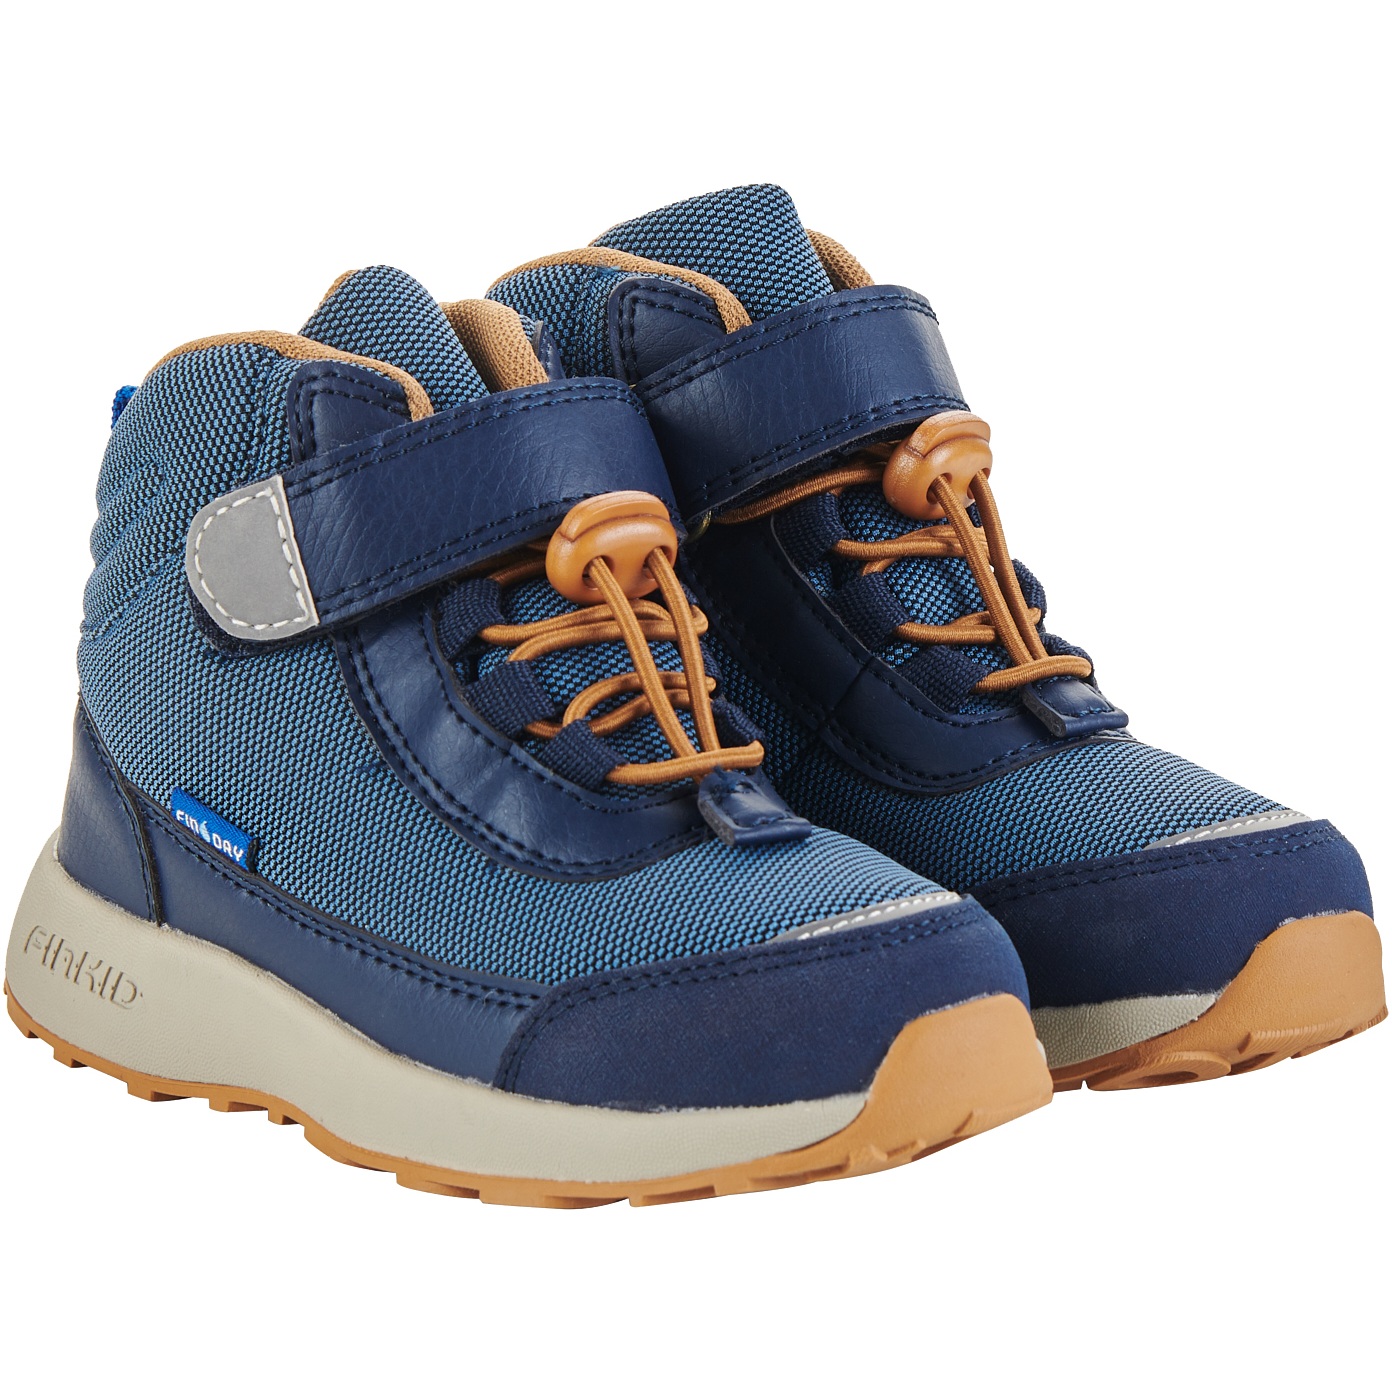 Picture of Finkid VUORI Kids Shoes - real teal/navy